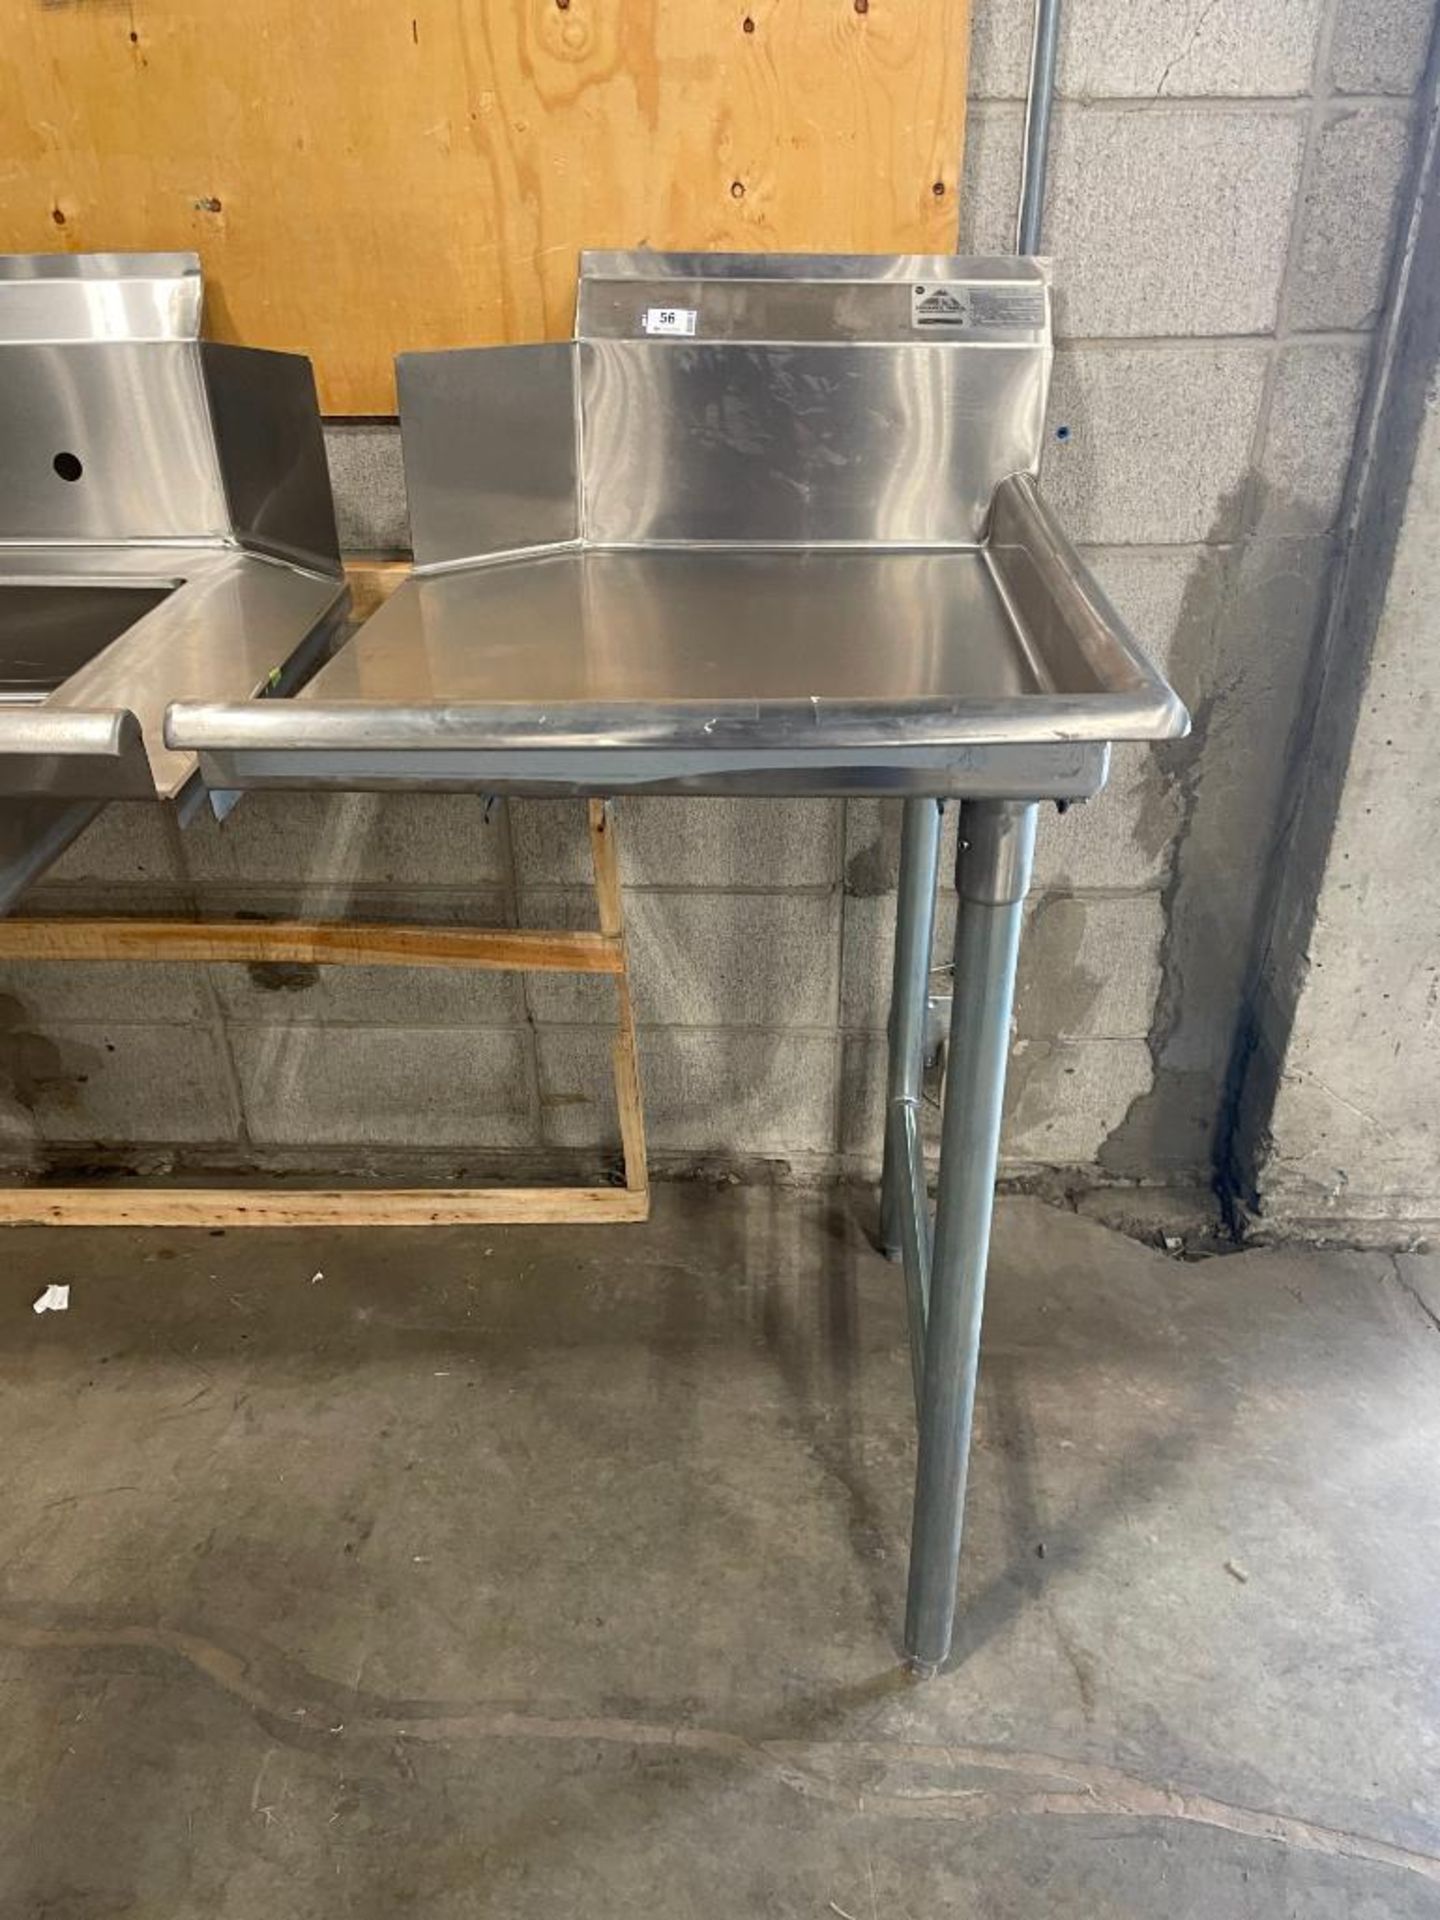 ADVANCE TABCO STAINLESS STEEL SOILED DISHTABLE 35" LEFT SIDE & STRAIGHT CLEAN DISHTABLE 23" RIGHT SI - Image 17 of 18